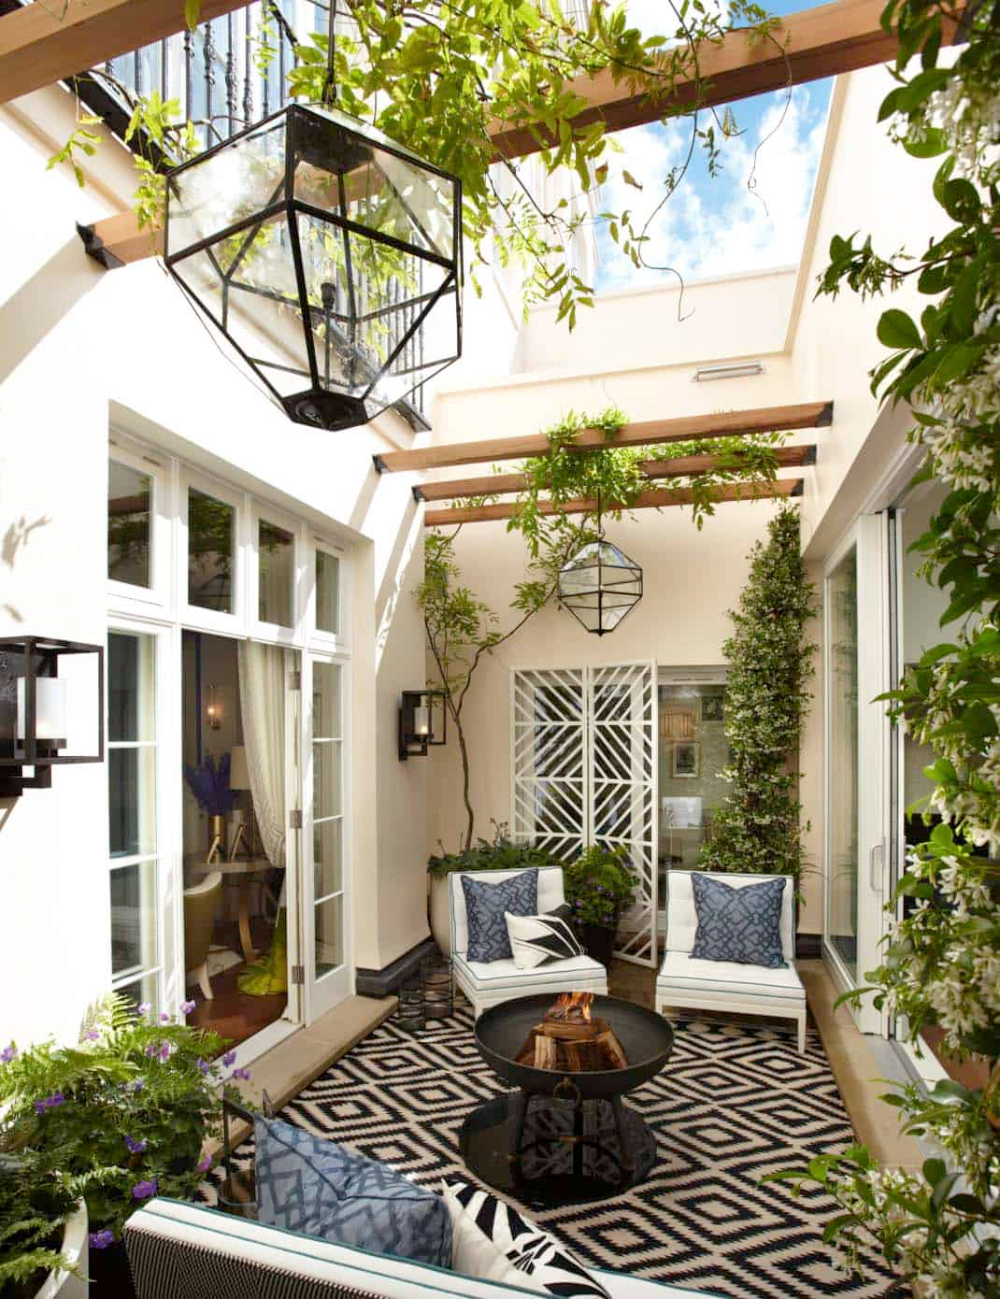 Transforming Your Outdoor Living Area into a Serene Oasis